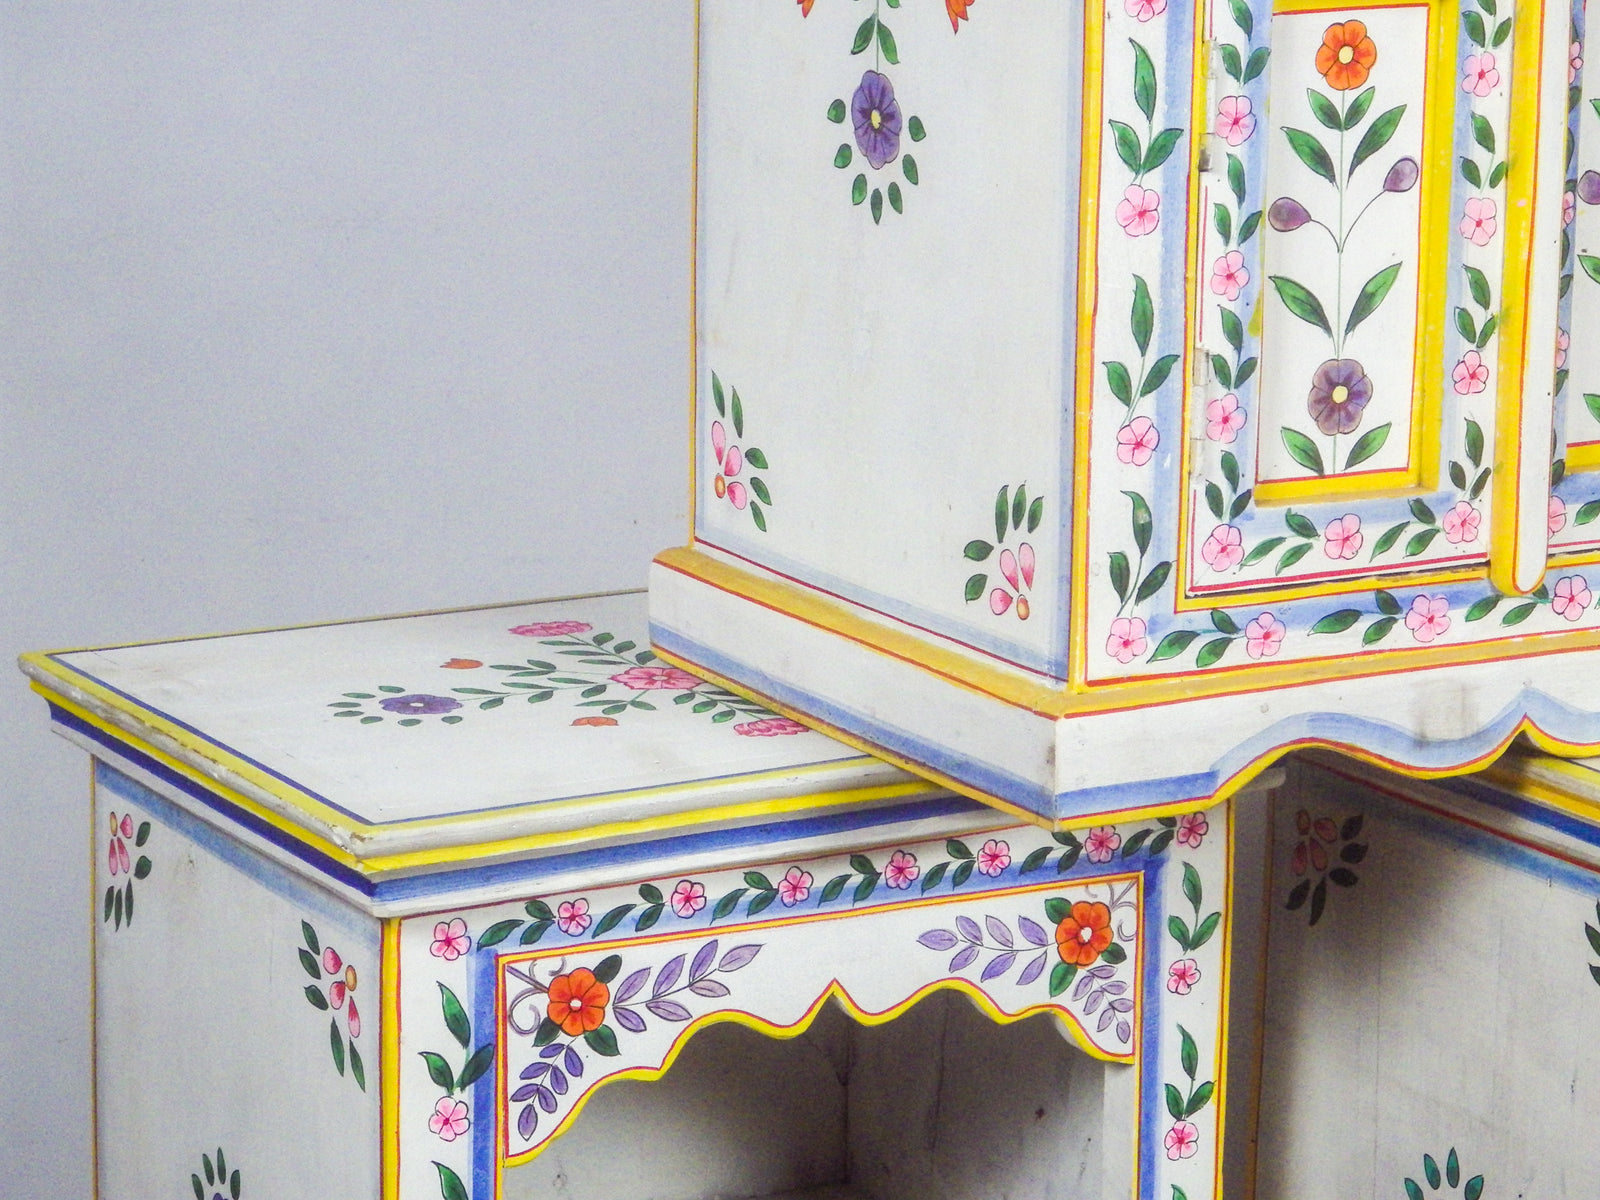 MILL-1453 Hand Painted Bedside Cabinet C19